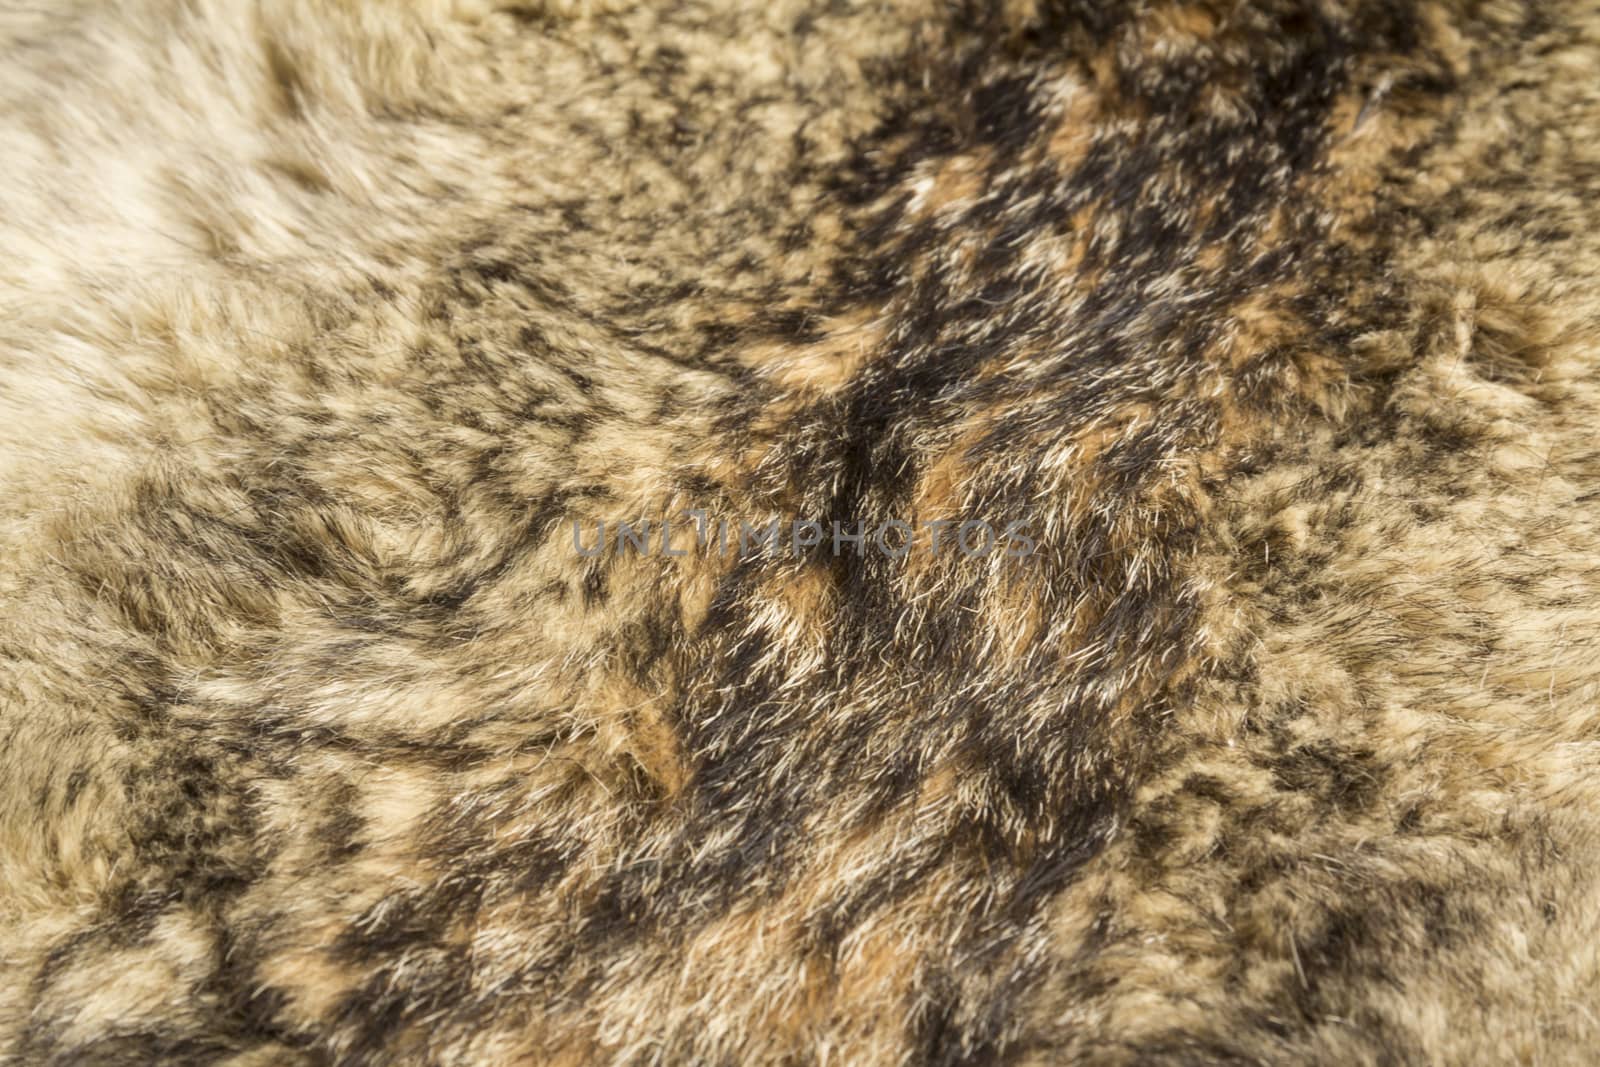 the background texture of the fur pelt of a wild Wolf